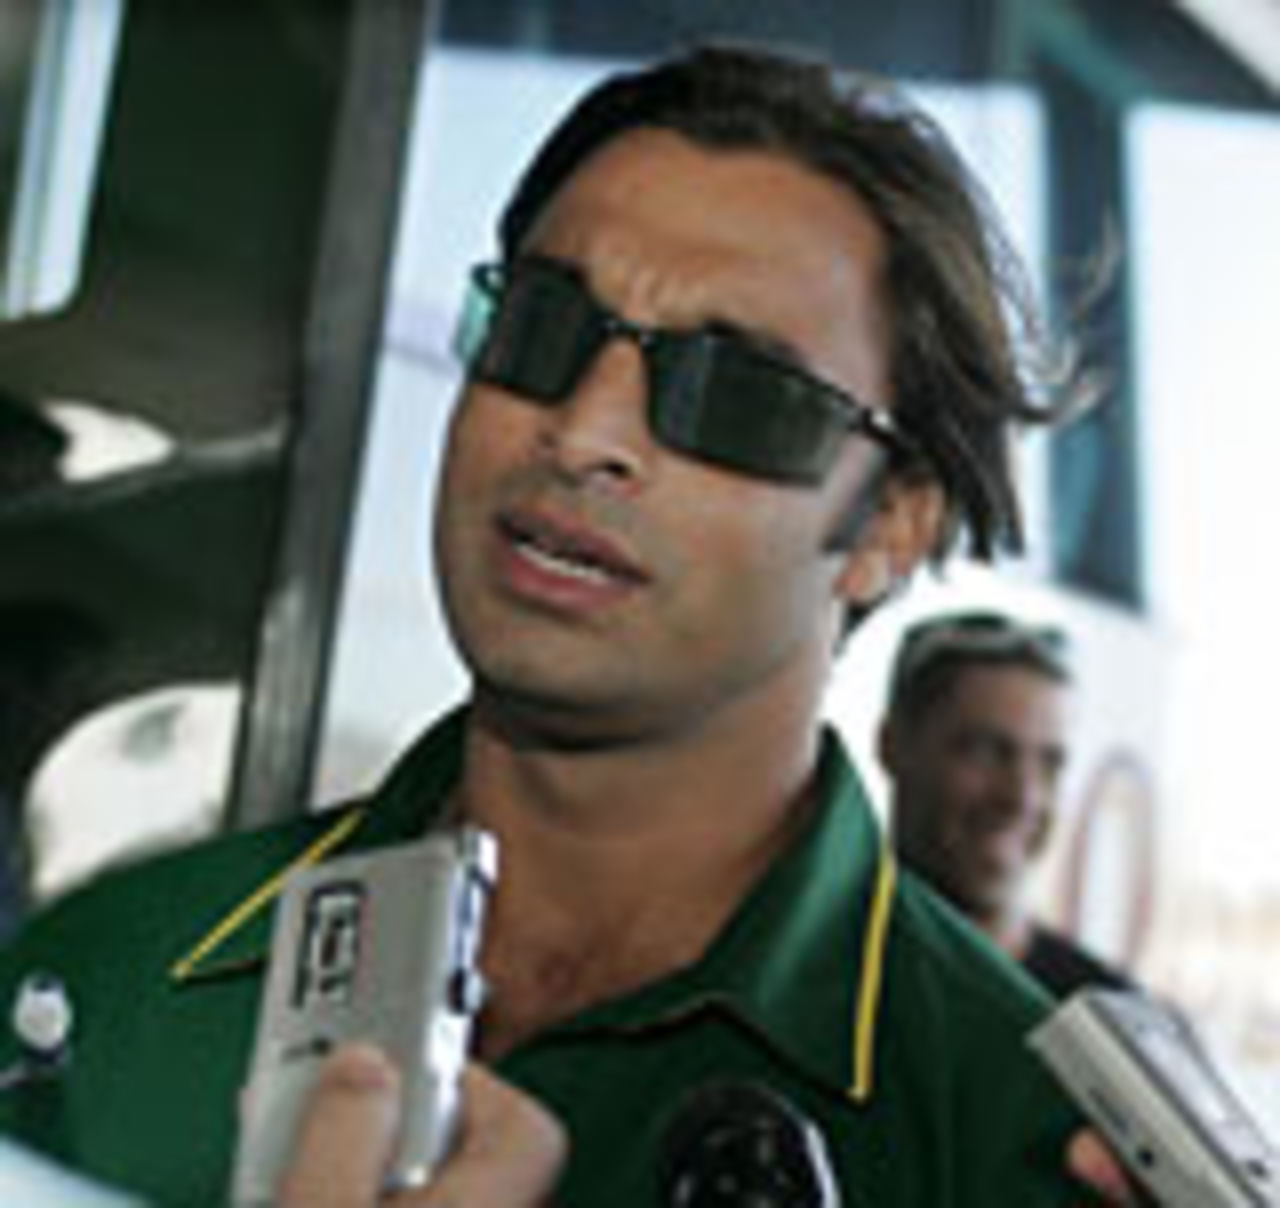 Shoaib Akhtar faces questions upon his arrival in Perth, November 29 2004